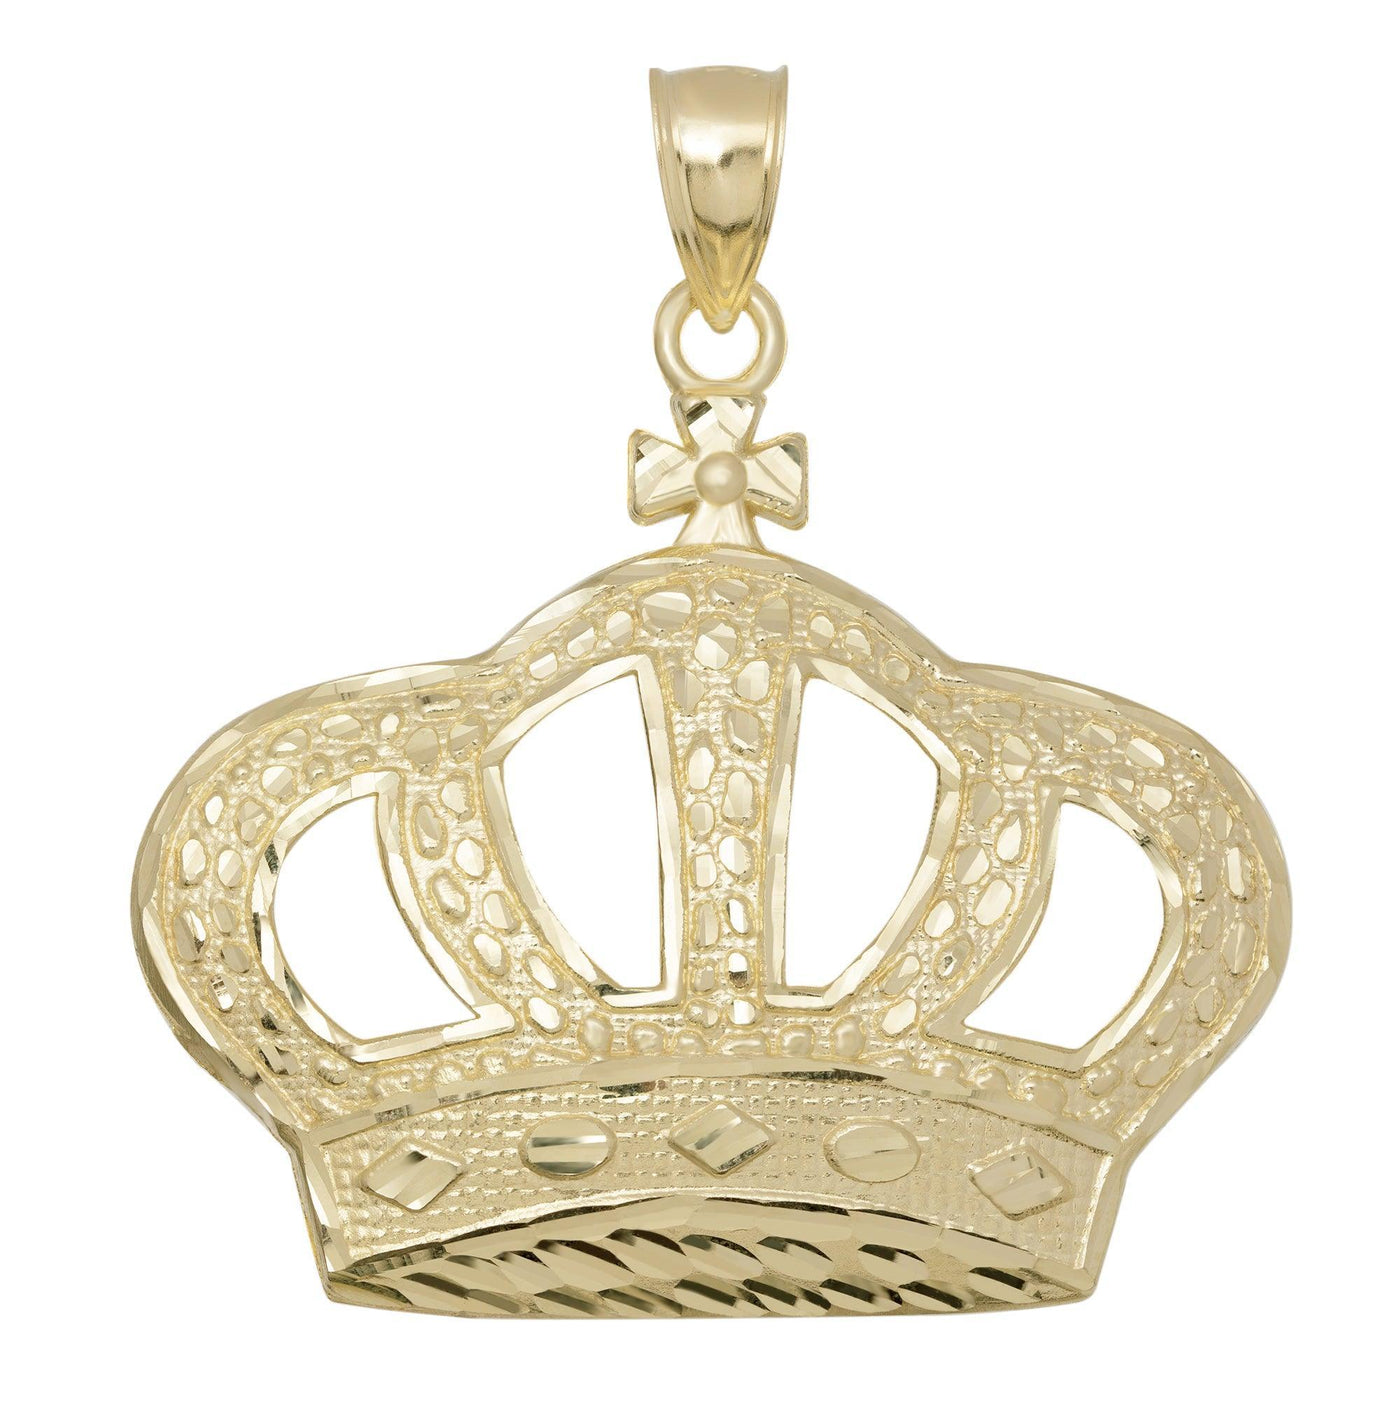 Textured Nugget Style Crown Pendant Solid 10K Yellow Gold - bayamjewelry